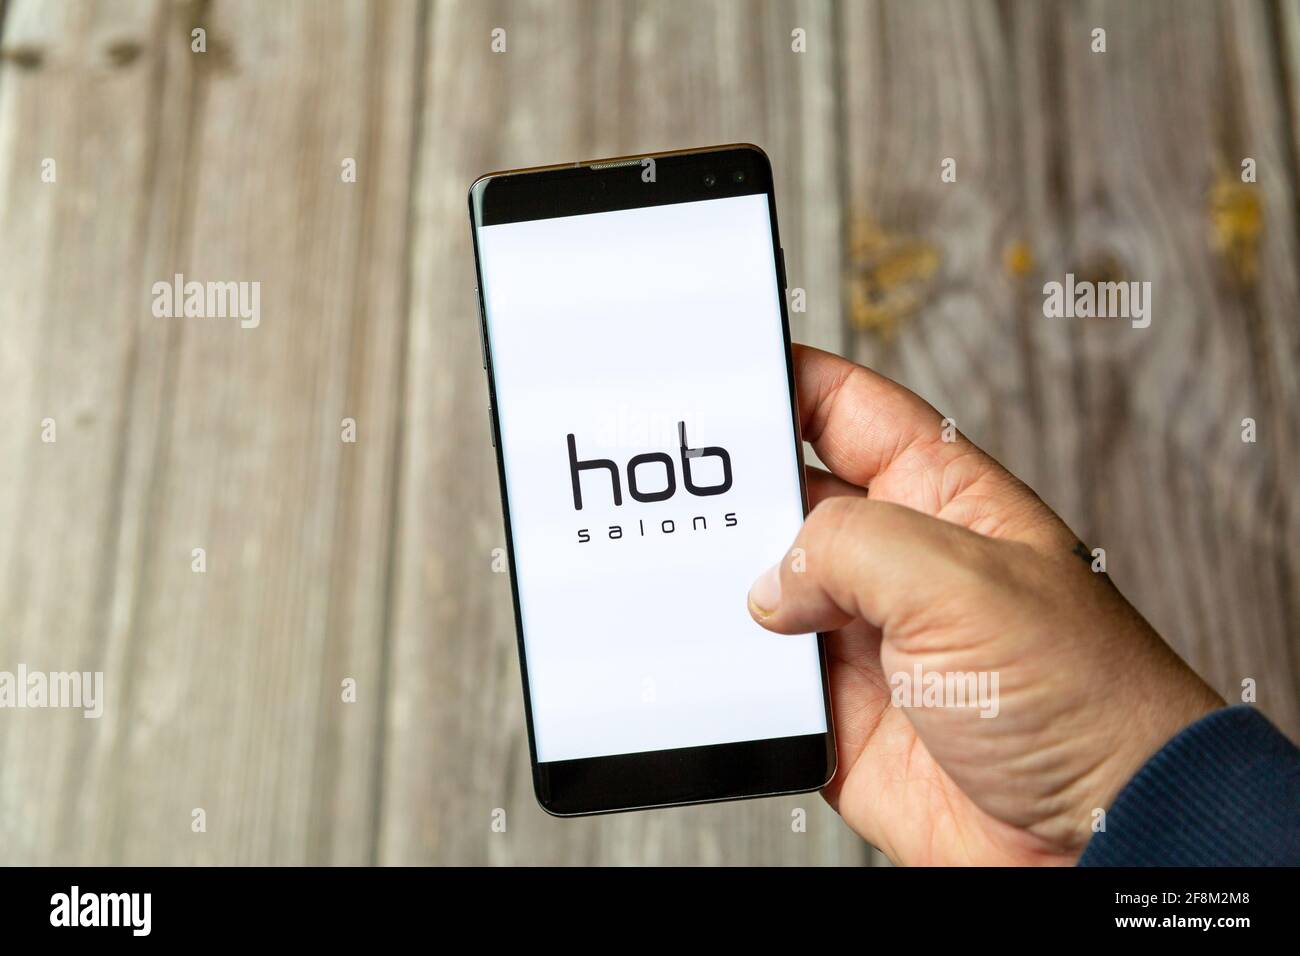 A Mobile phone or Cell phone being held in a hand showing the hob salons app on screen Stock Photo